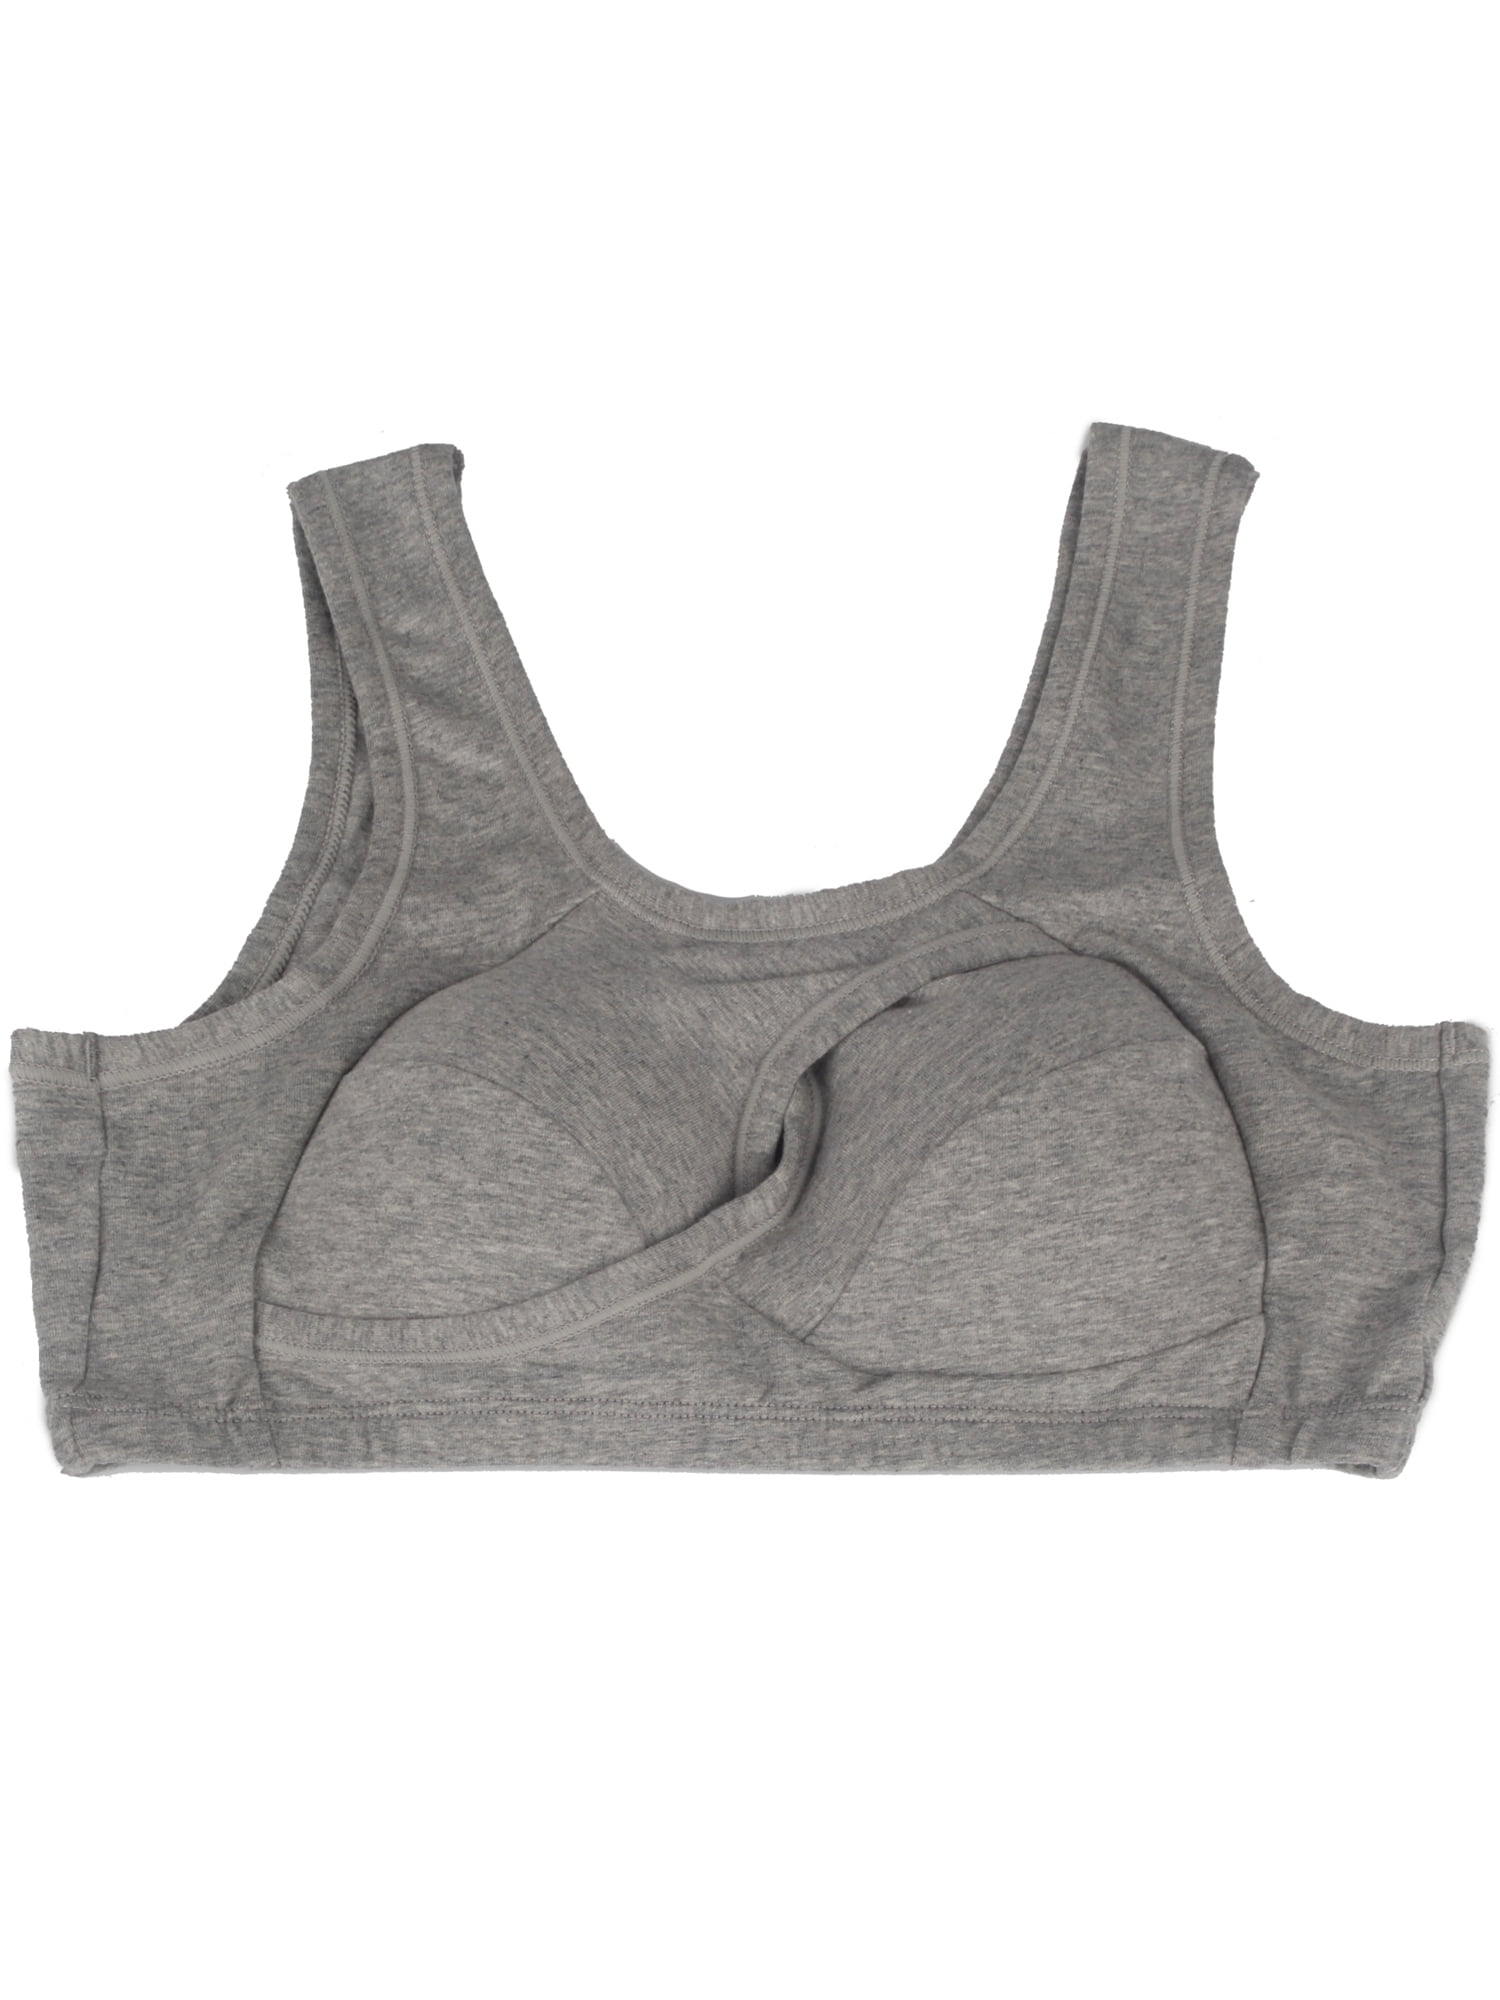 Nano Edge Present Racerback Sports Bra for Women Seamless High Impact  Running Yoga Gym Workout Bras Grey Color Size (28 to 34)